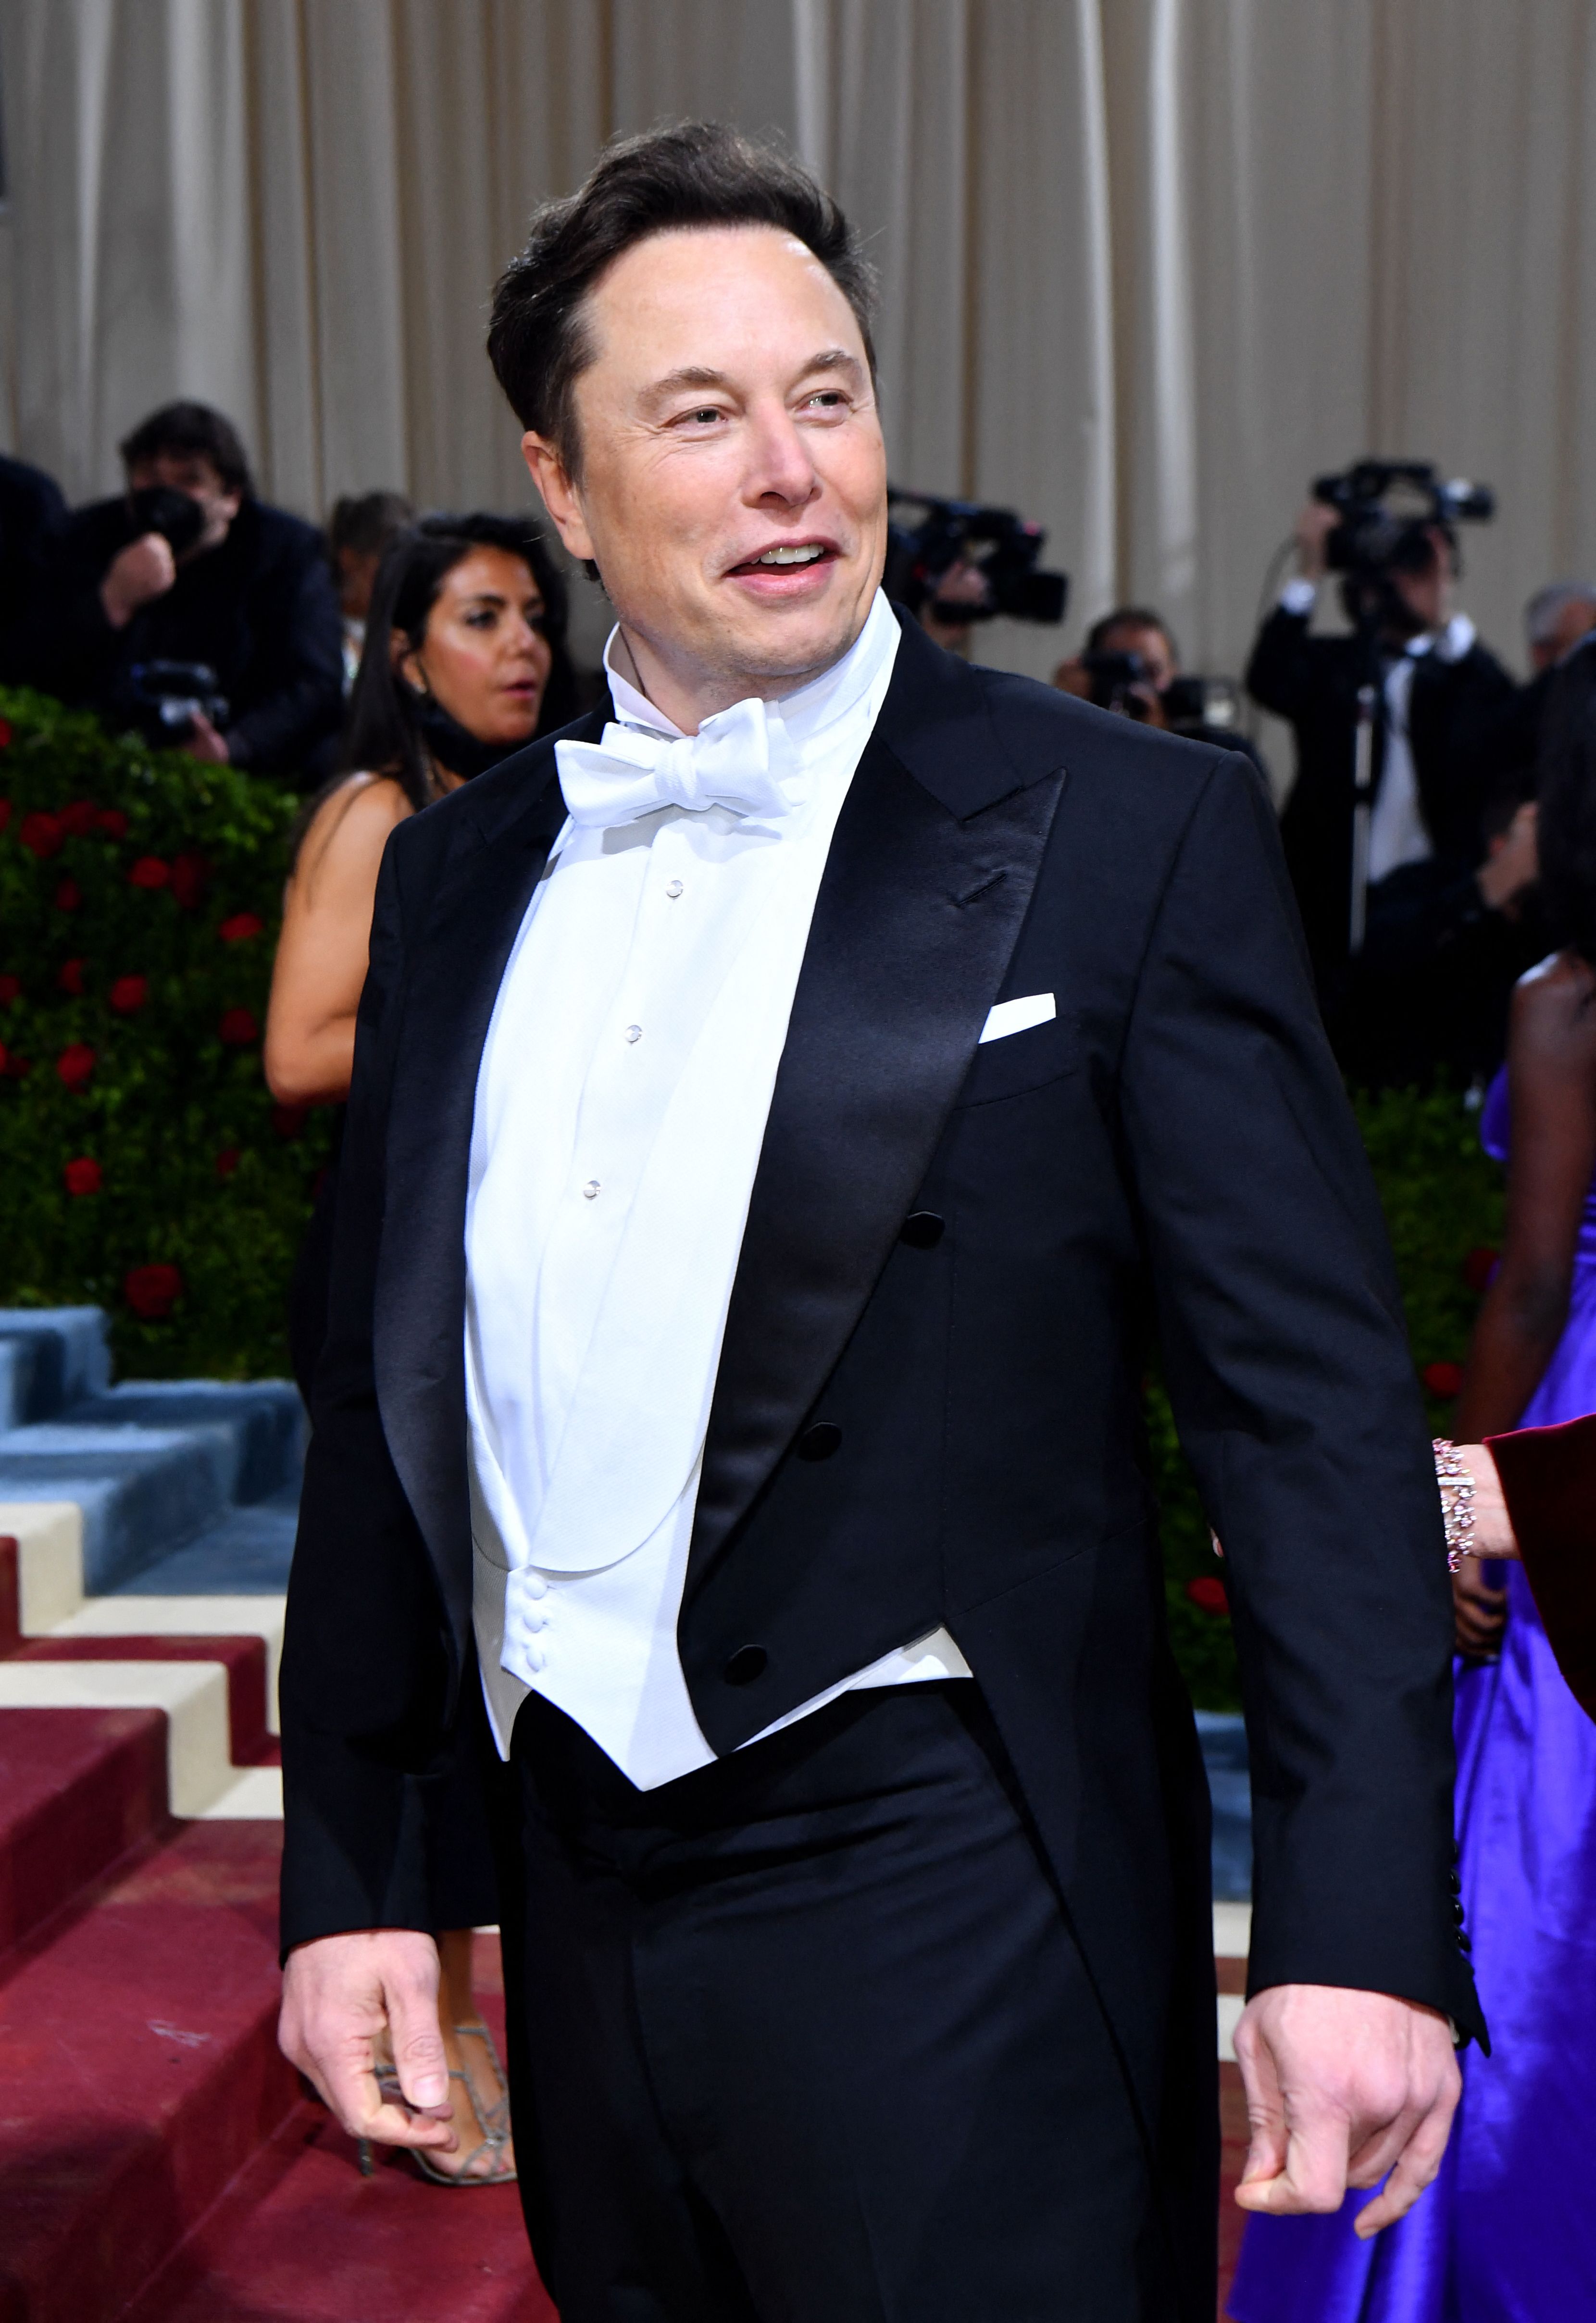 CEO, and chief engineer at SpaceX, Elon Musk, arrives for the 2022 Met Gala at the Metropolitan Museum of Art on May 2, 2022, in New York. (Angela  Weiss—AFP/Getty Images)